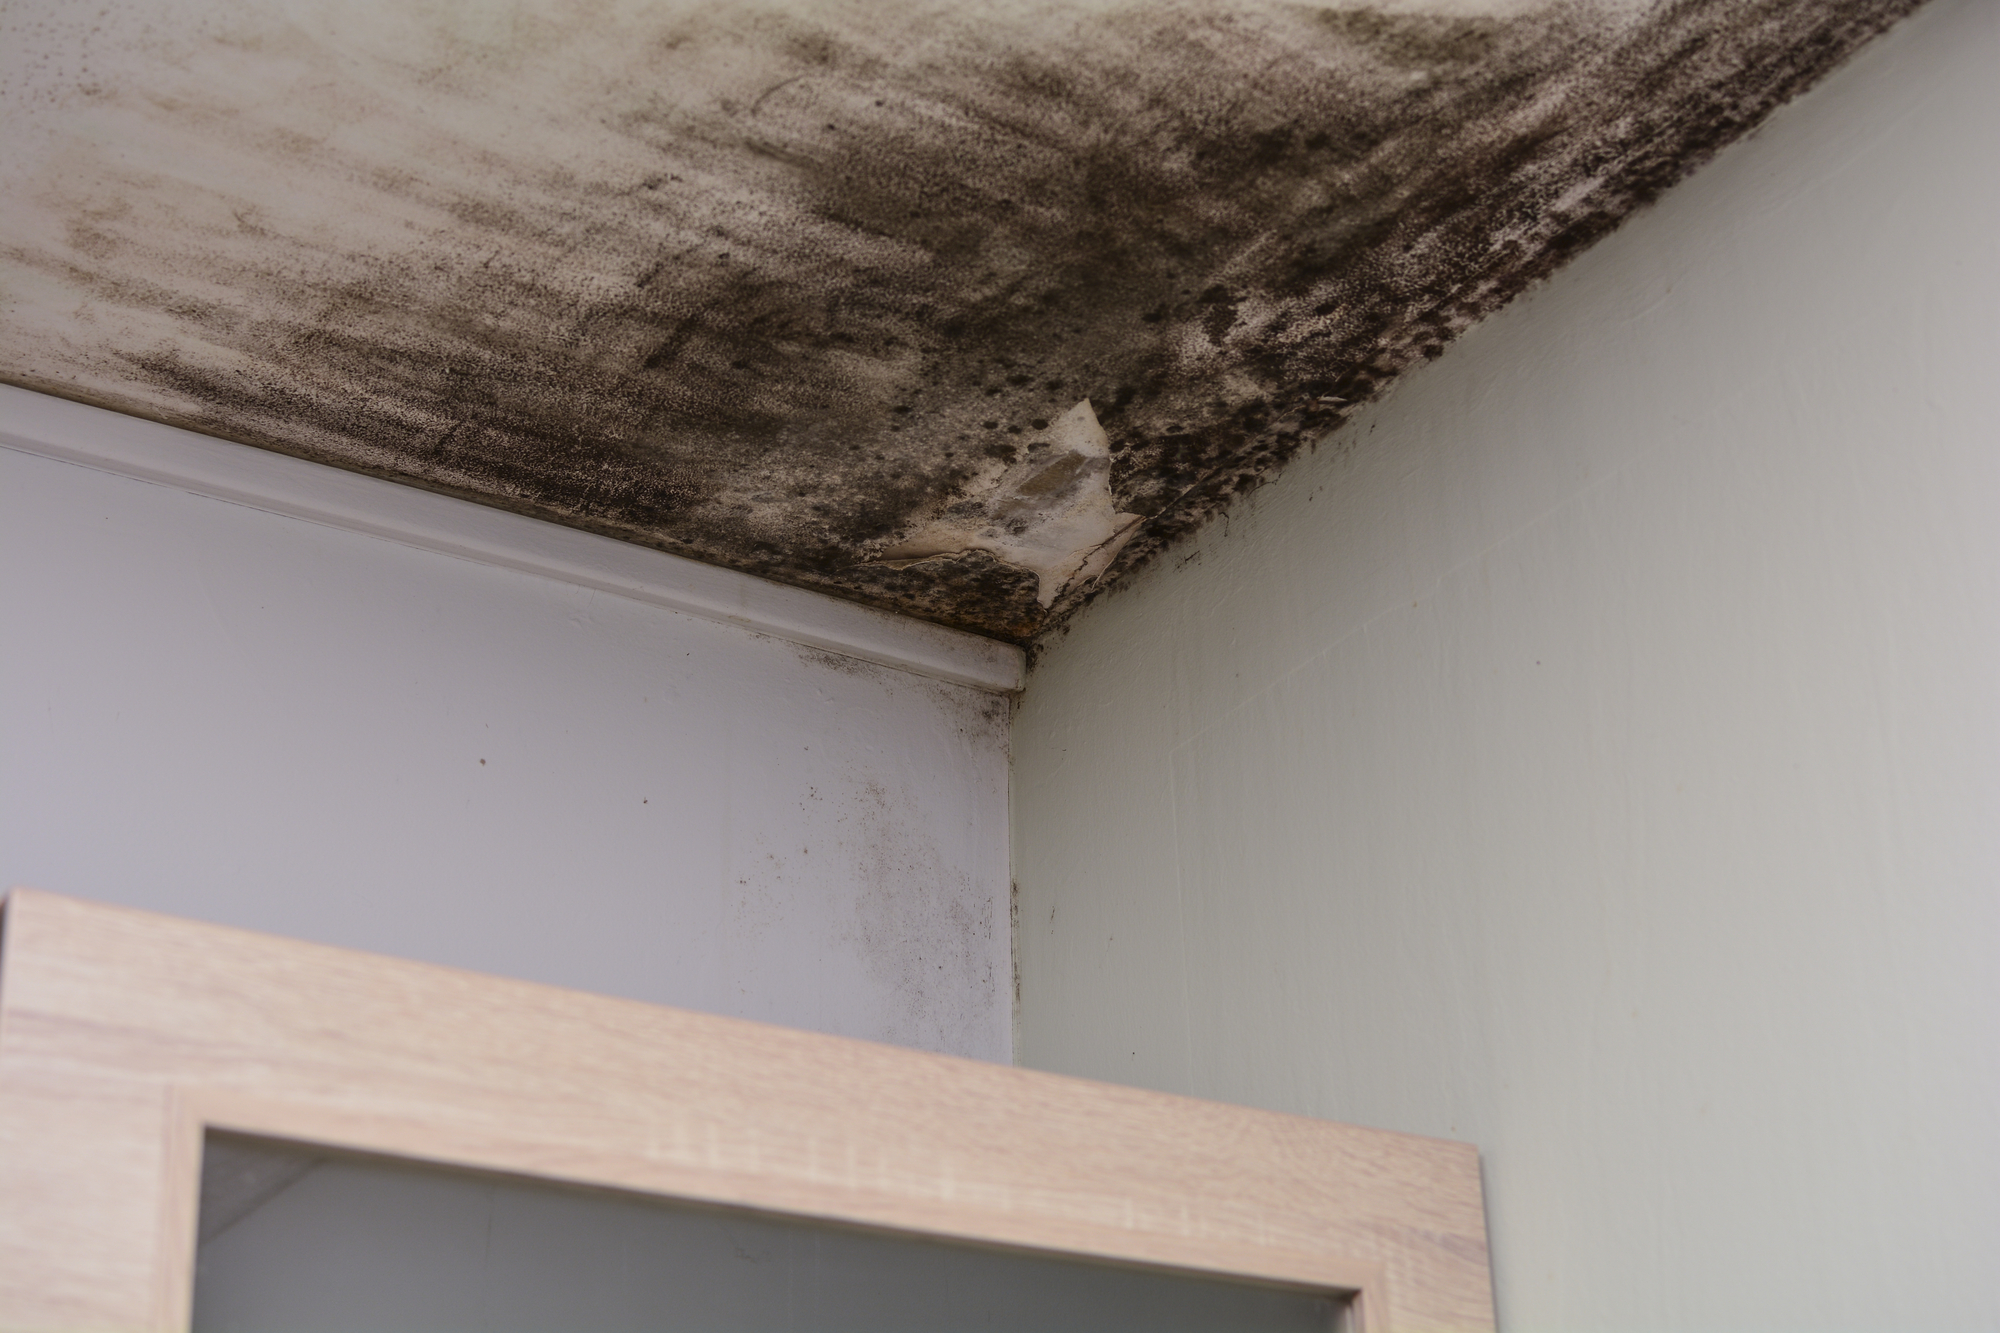 Roof with black mold in need of mold remediation in Georgia